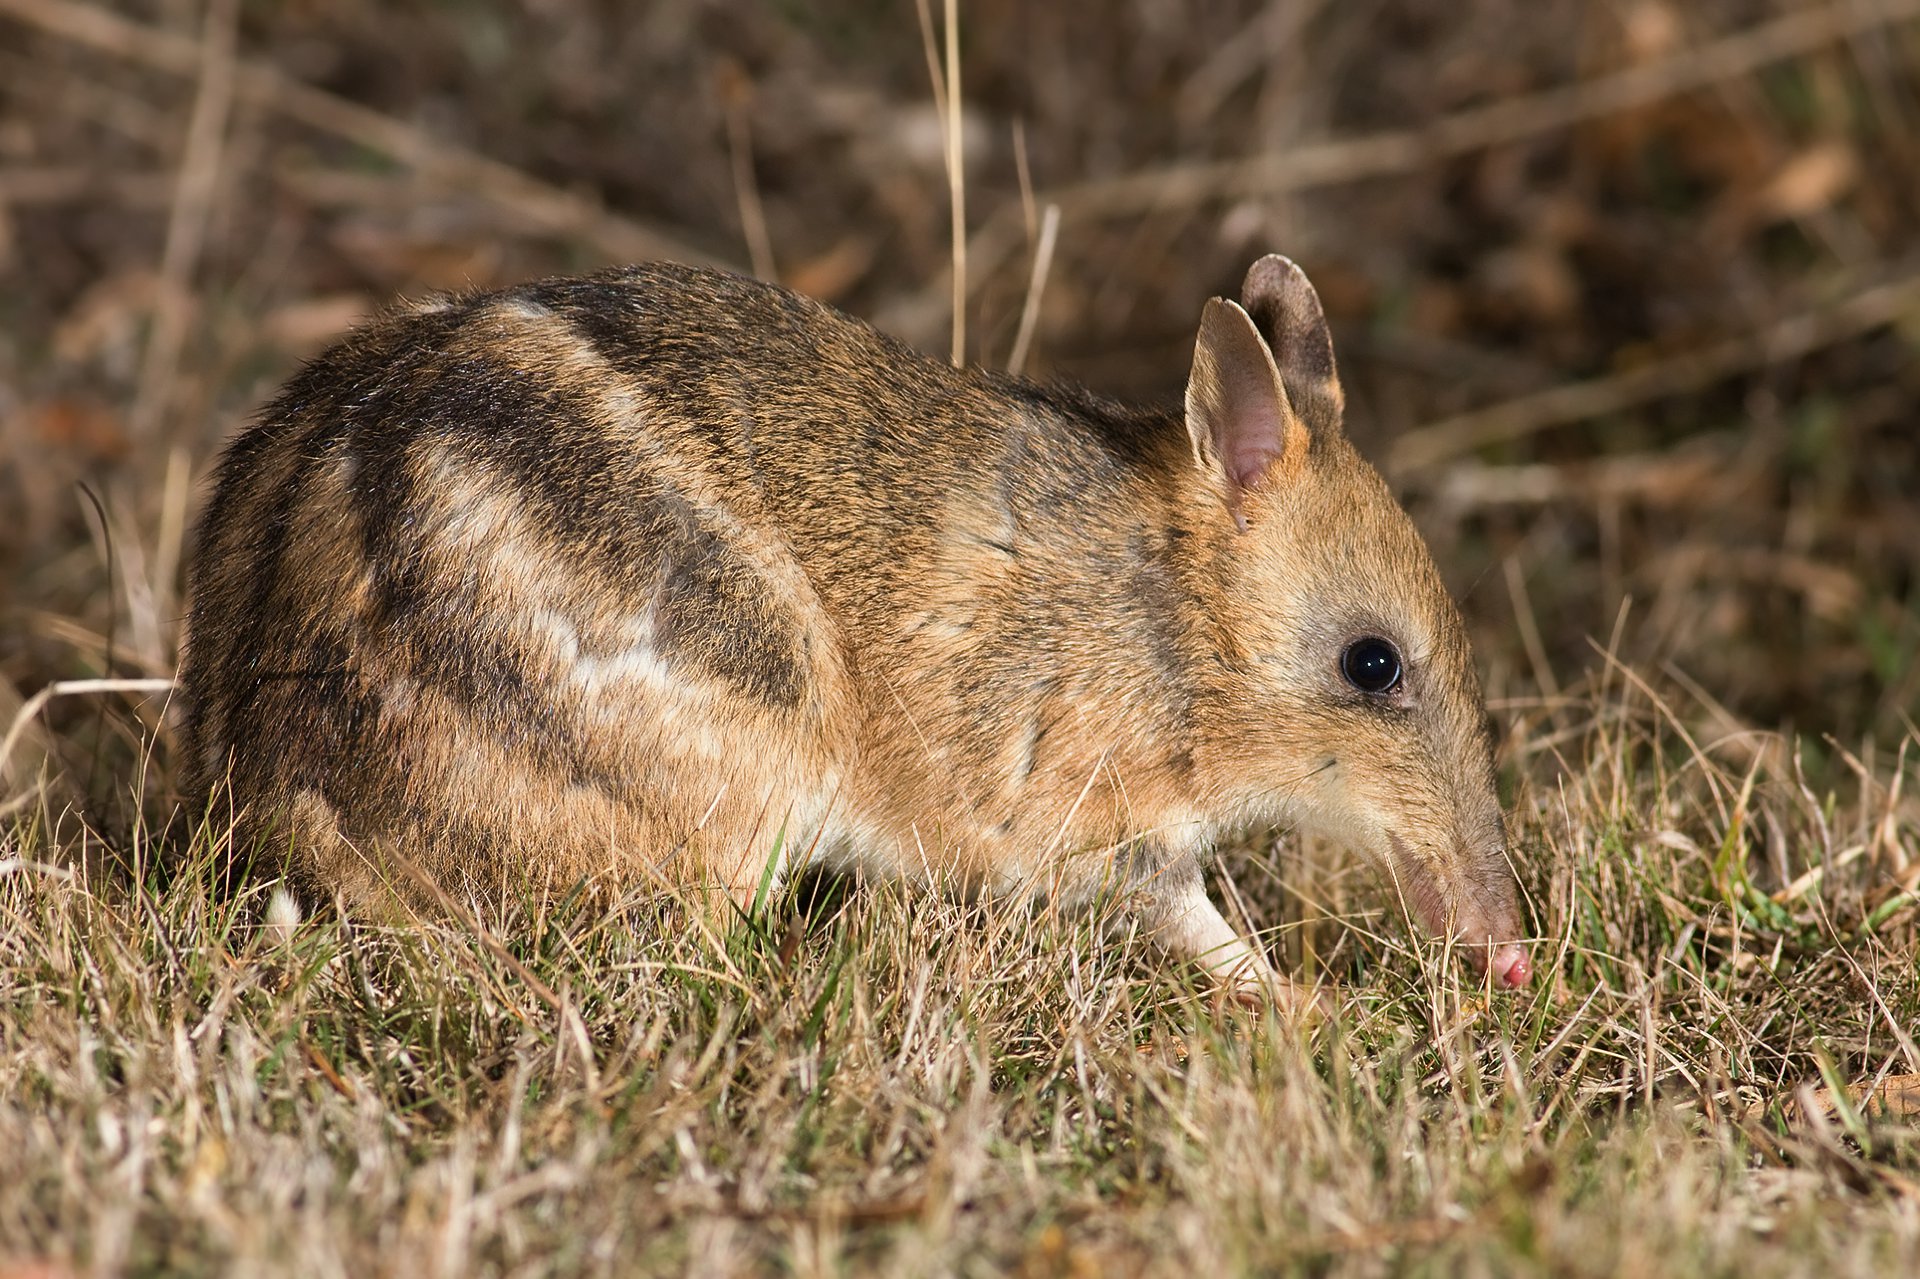 Bouncing Back: a story of hope for the Eastern Barred Bandicoot